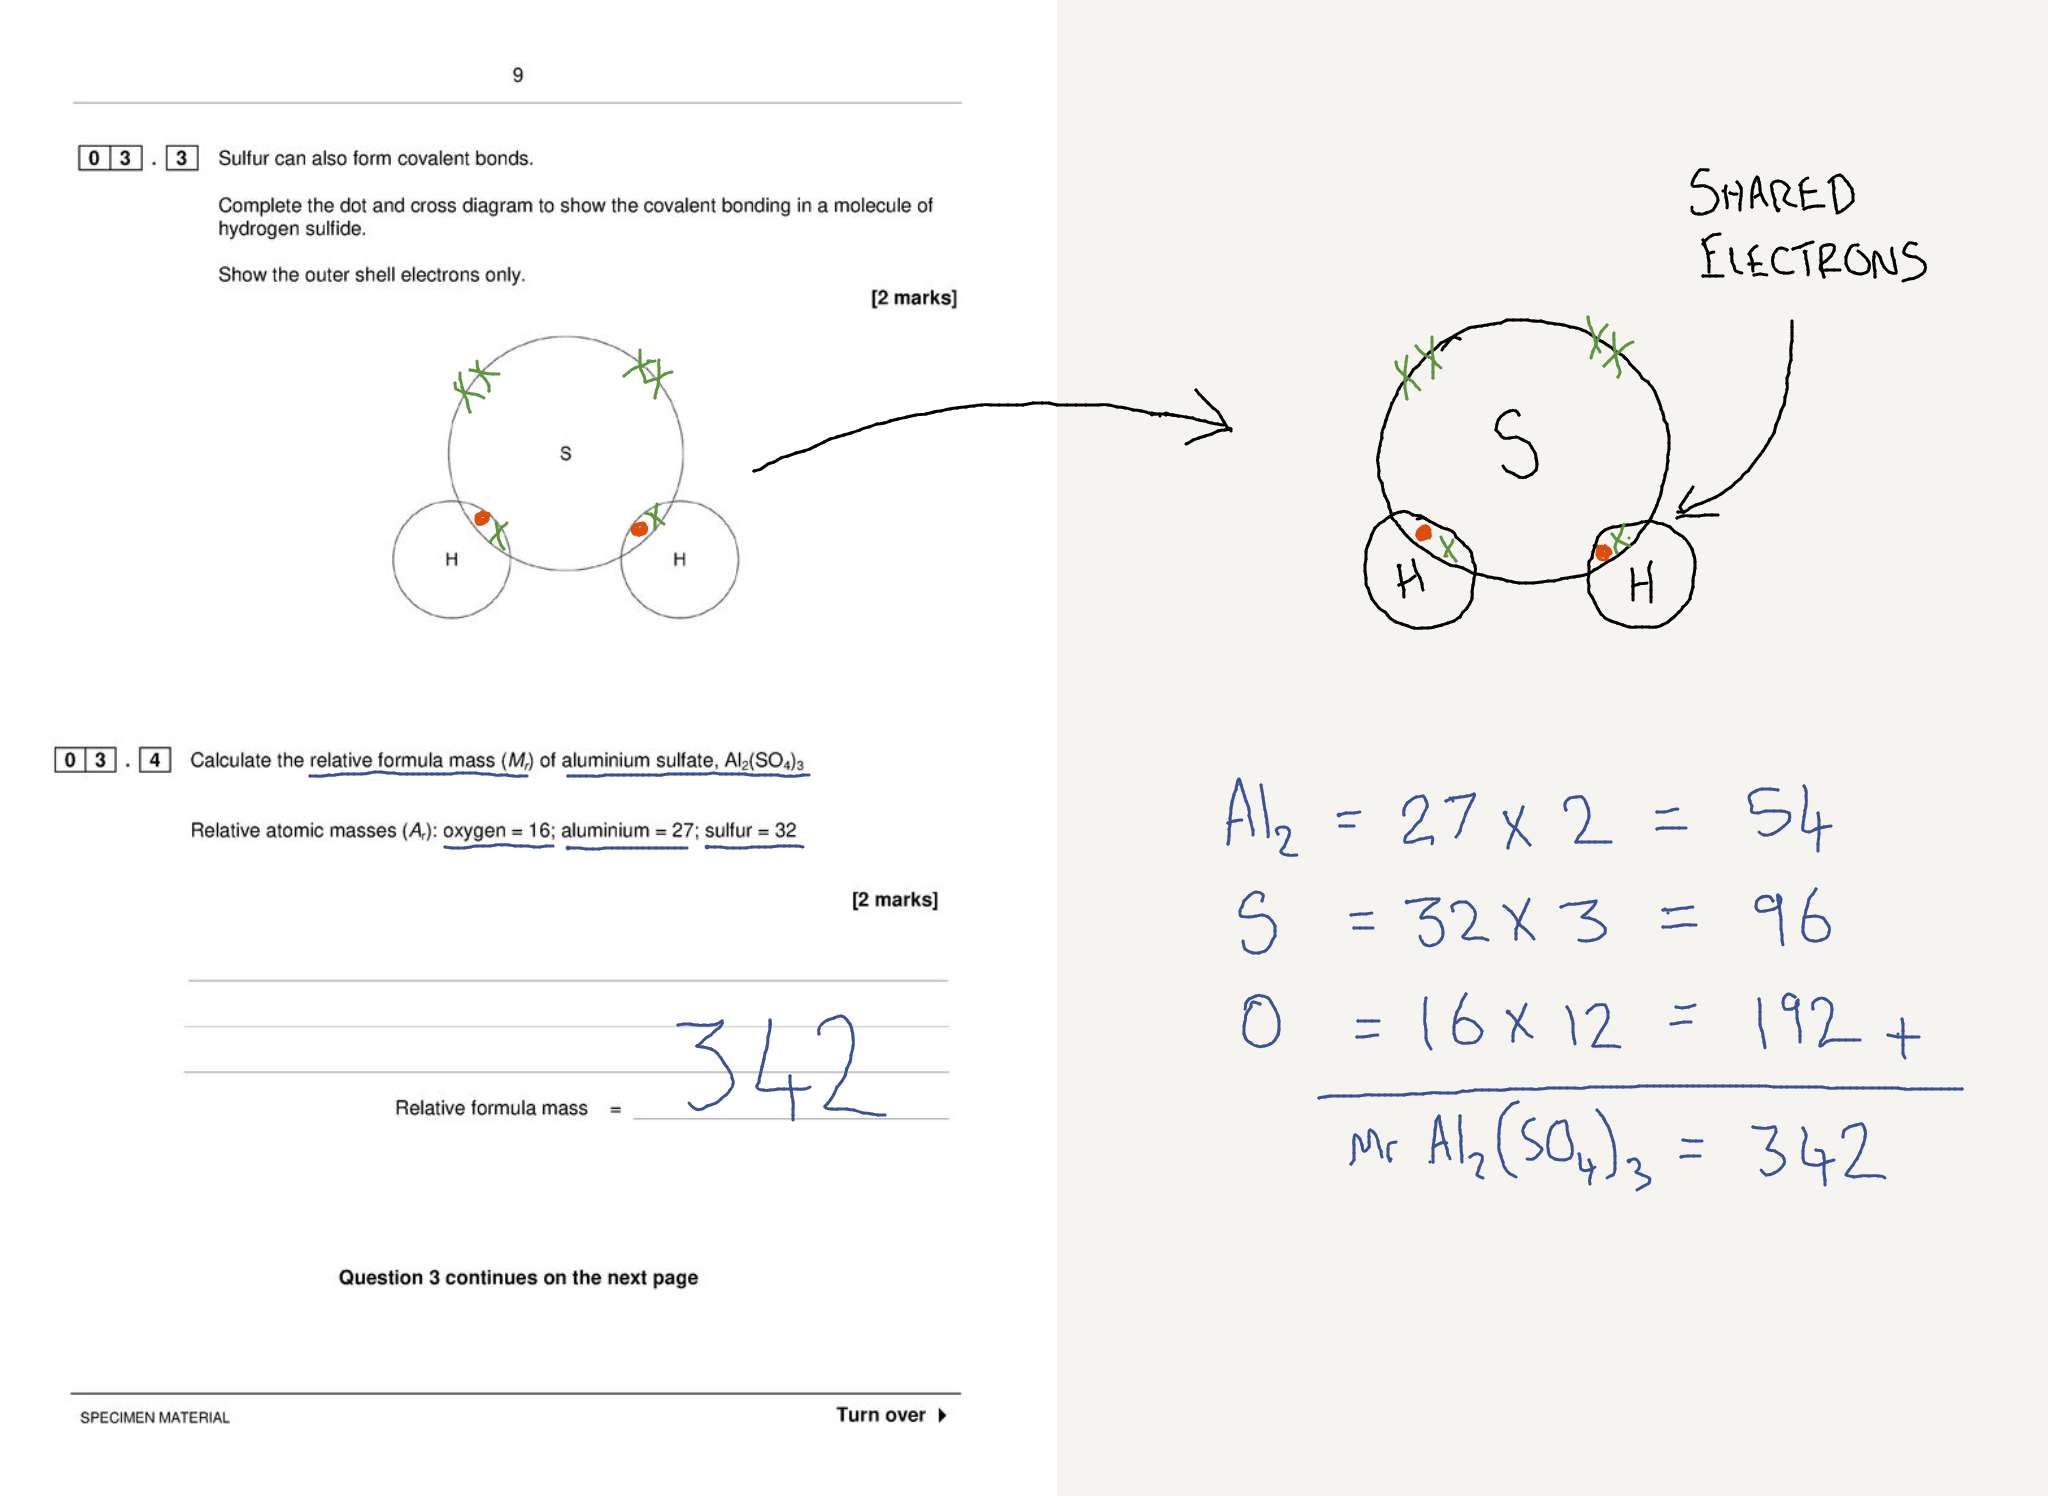 picture of a written exam answer drawn in Bramble using an iPad Pro